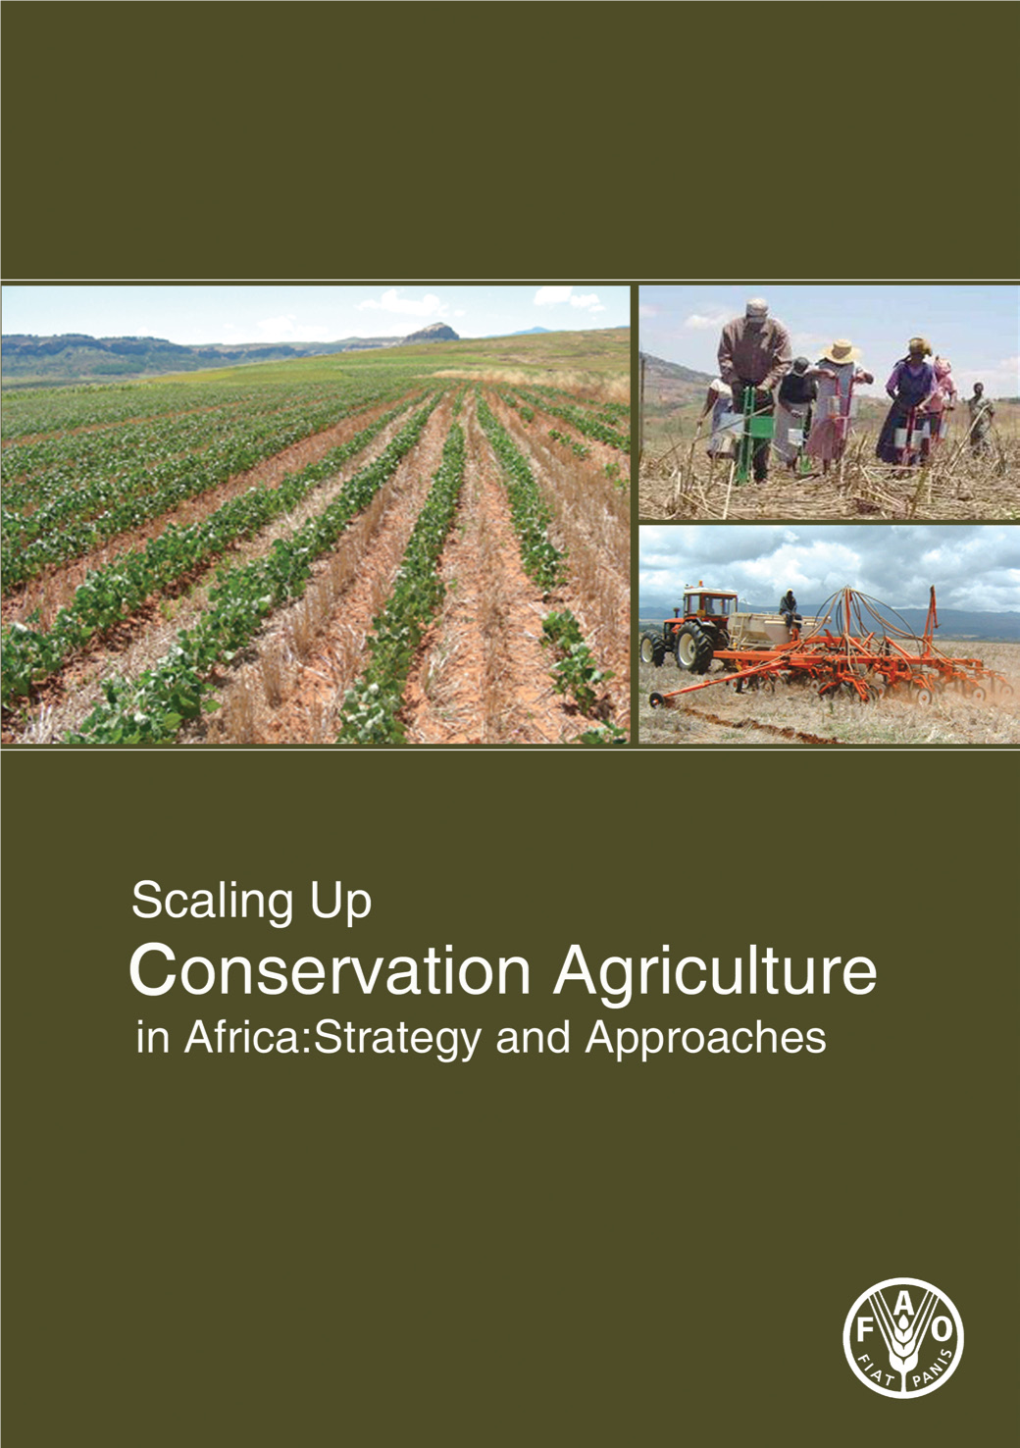 Scaling-Up Conservation Agriculture in Africa: Strategy and Approaches